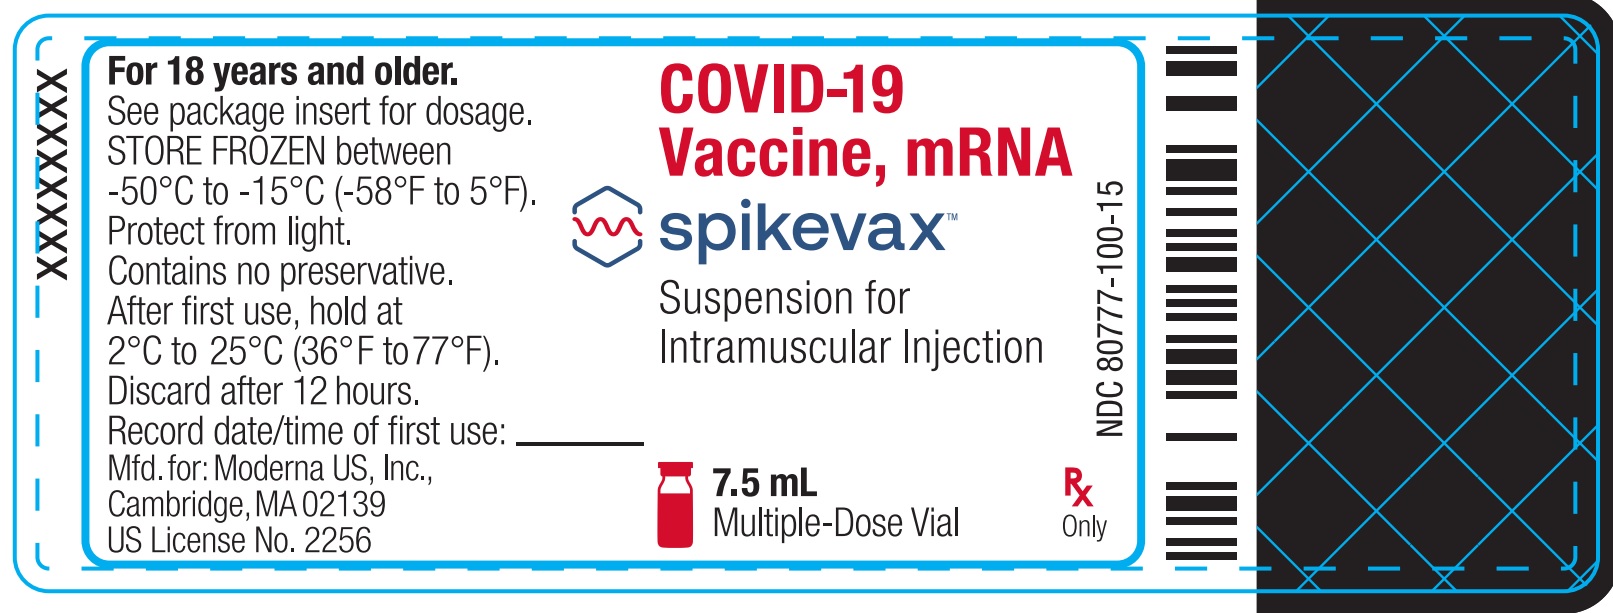 Spikevax (COVID-19 Vaccine, mRNA) Suspension for Intramuscular Injection Multiple-Dose Vial 7.5 mL